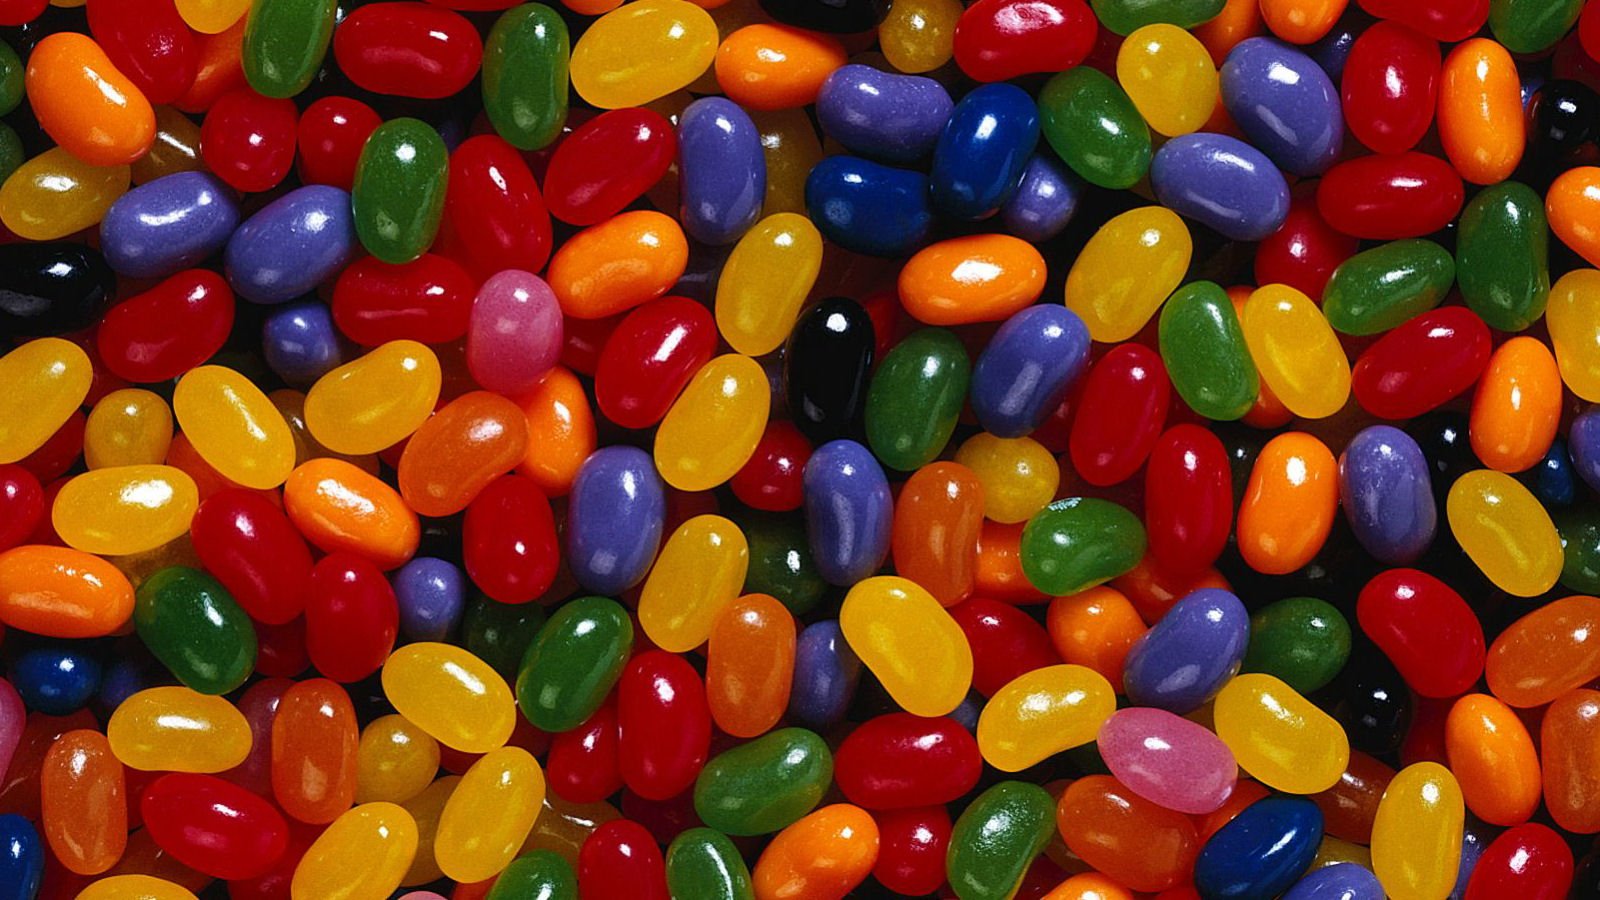 Jelly Bean HD Wallpaper Background Image